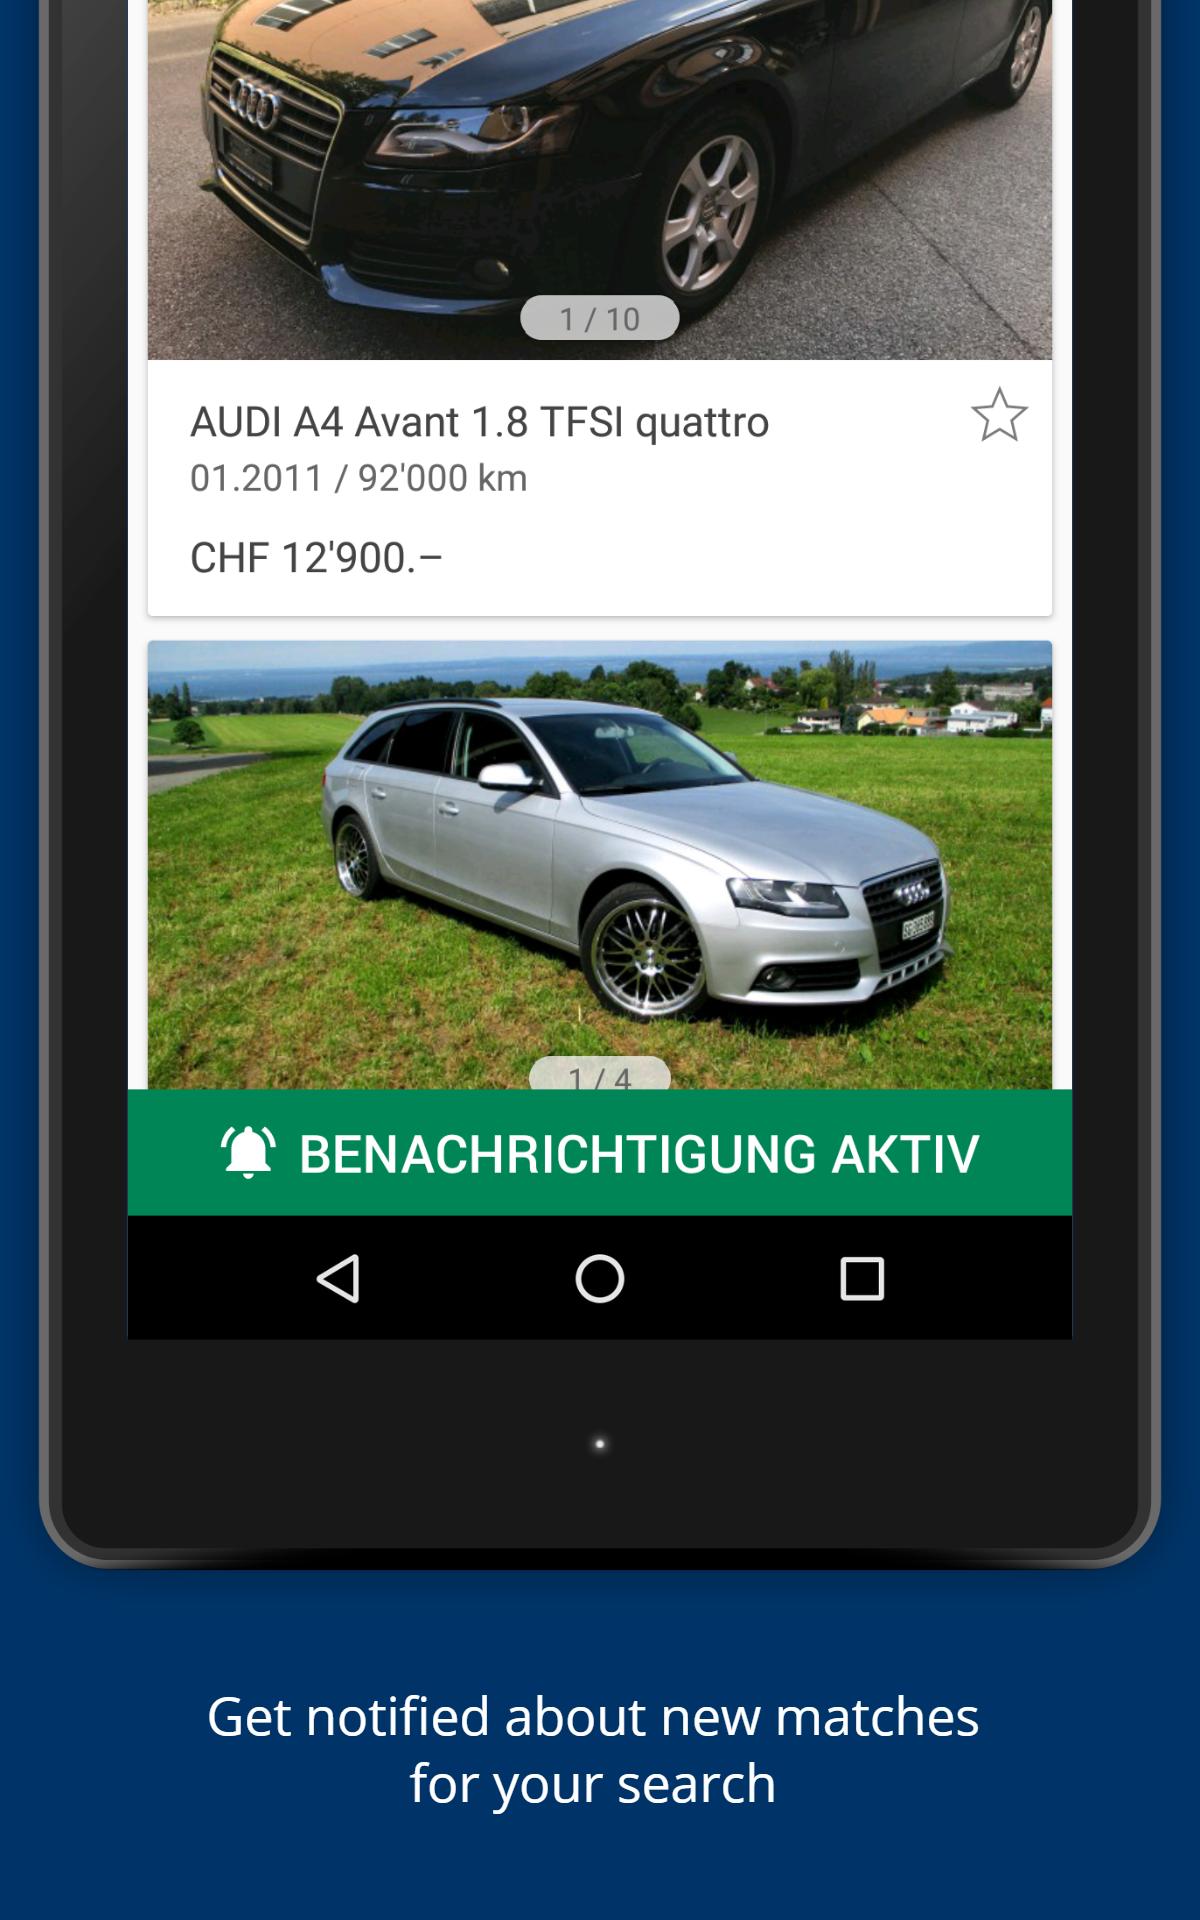 AutoScout24 Switzerland – Find your new car 4.0.0 Screenshot 16